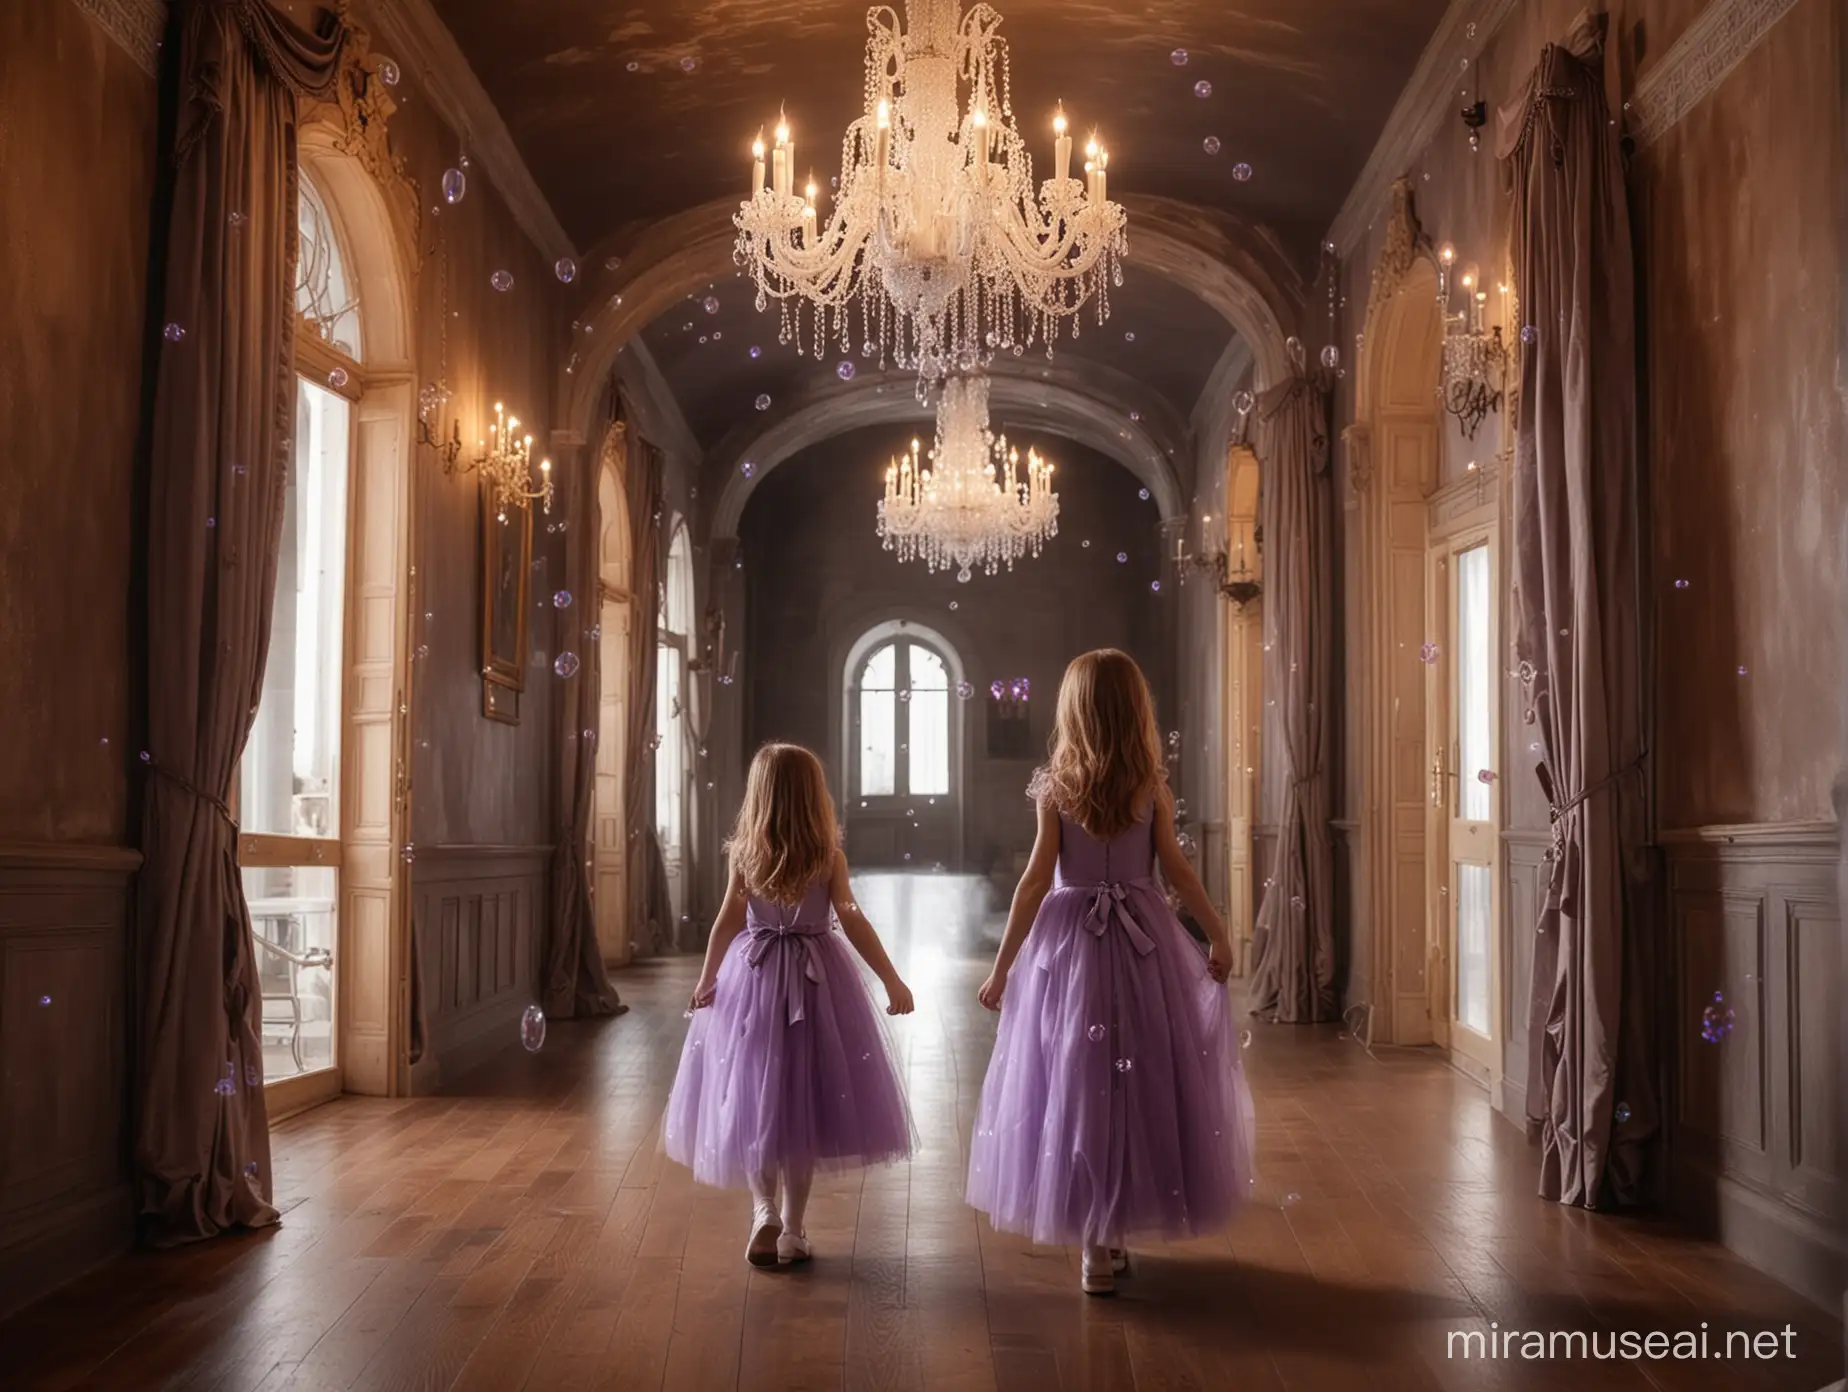 Enchanting Dark FairyTale Castle Corridor with Luminous Chandeliers and Magical Atmosphere featuring a Young Girl and a White Rabbit